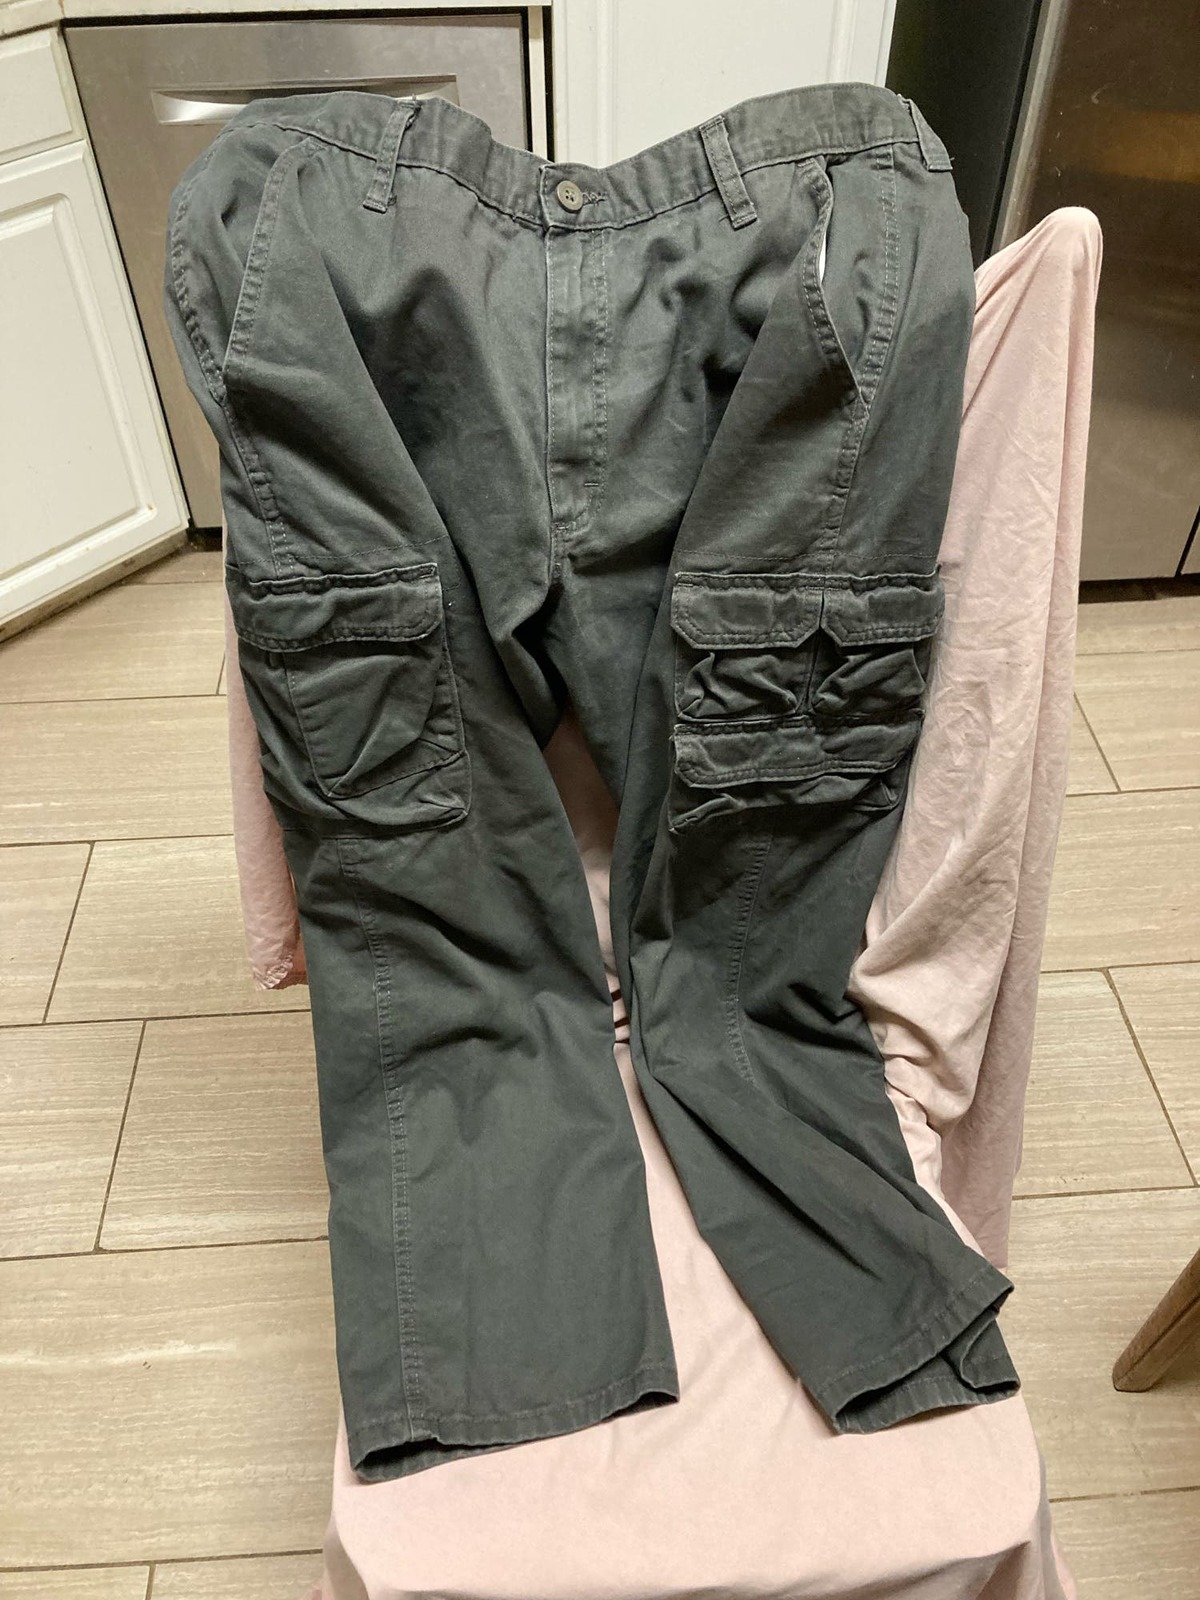 Primary image for Wrangler Cargo Pants Size 38x30